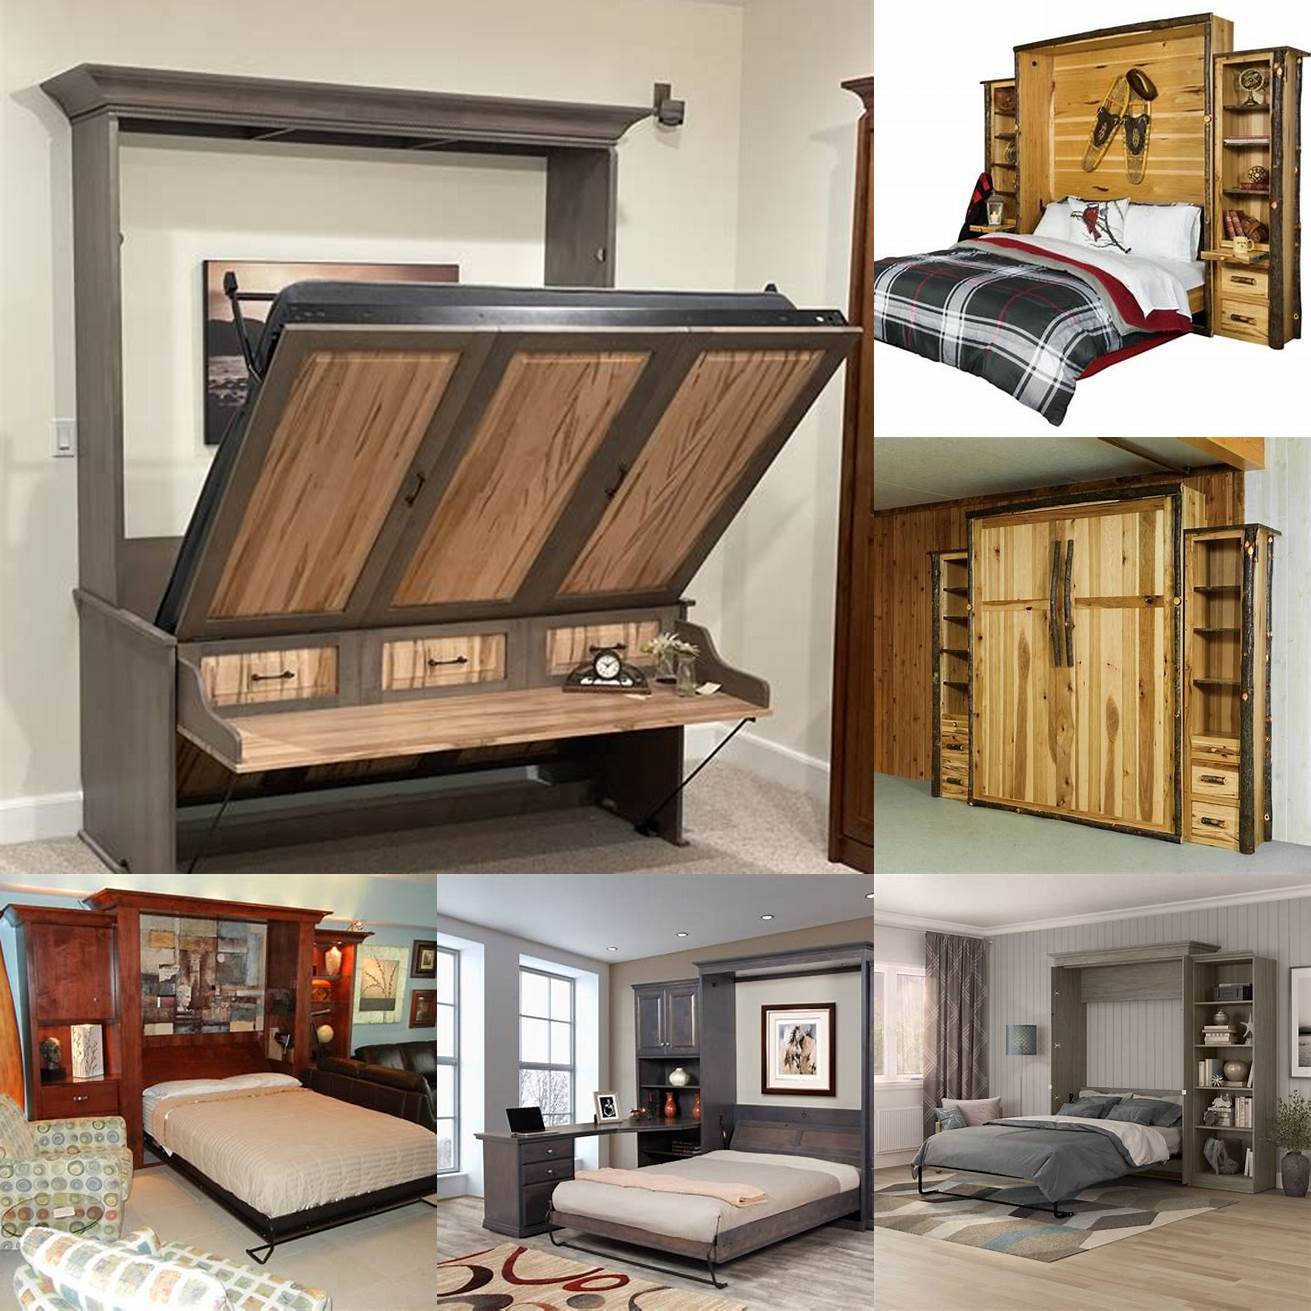 A rustic Queen Size Murphy Bed with a wooden frame